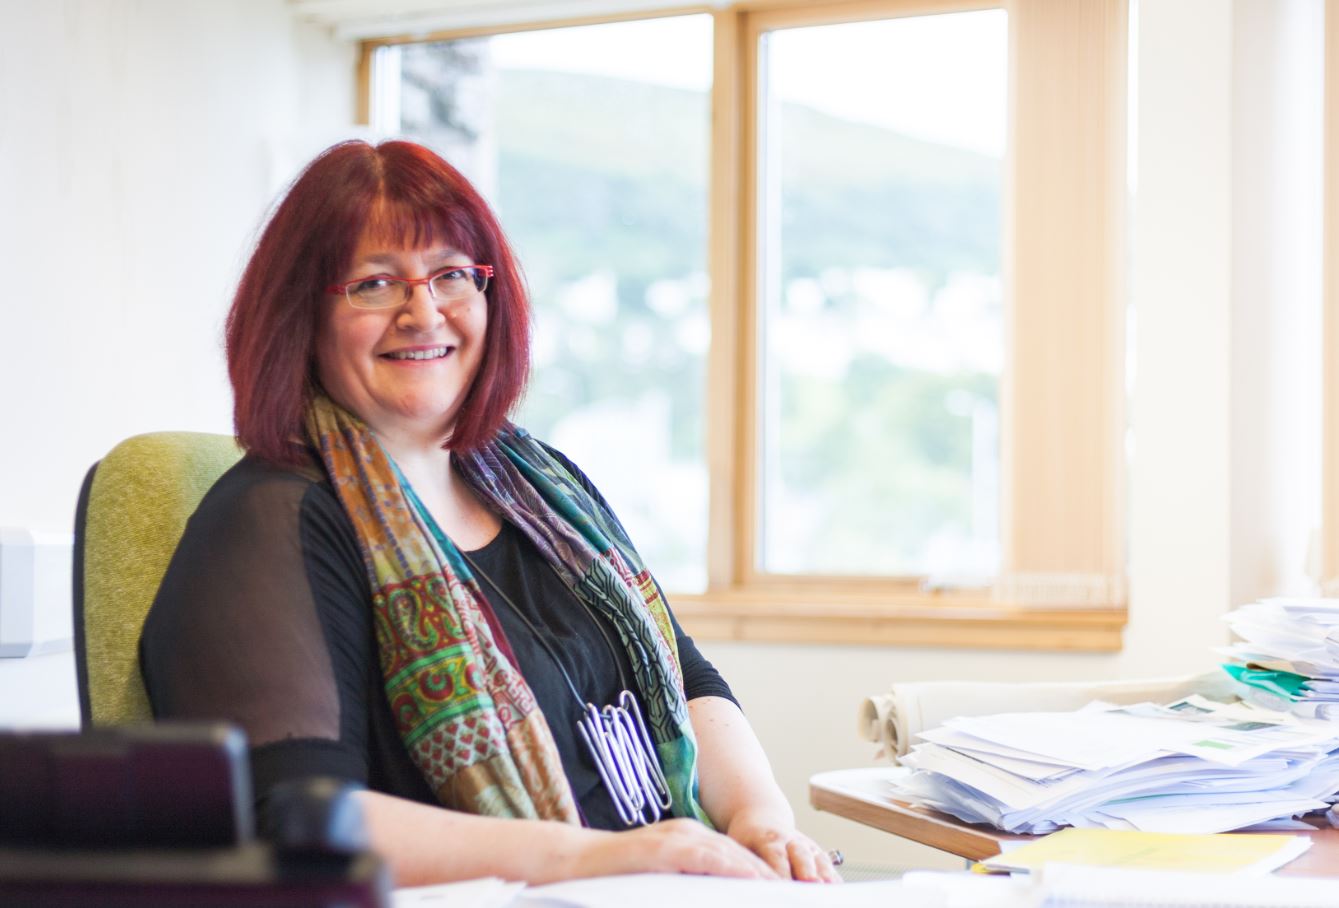 University of the Highlands and Islands welcomes Fair Access to Higher Education: Progress and Challenges Annual Report